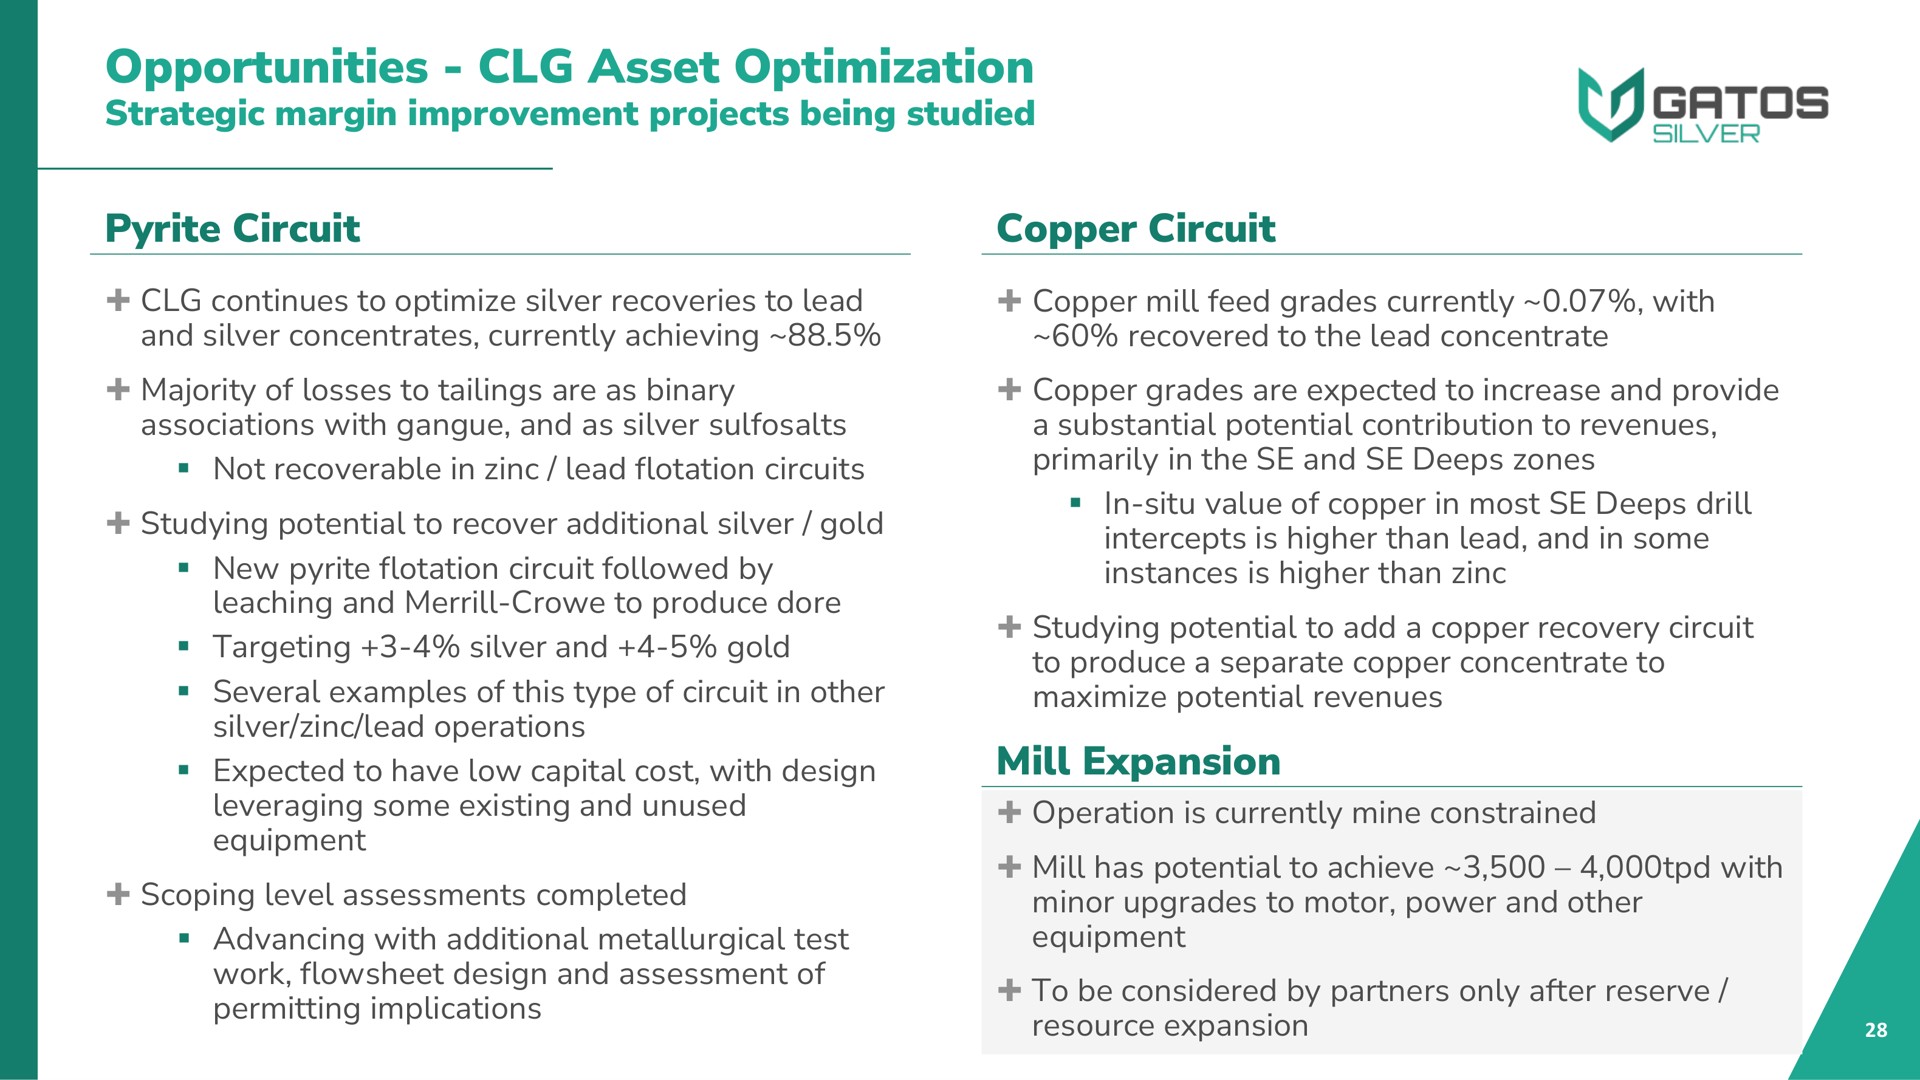 opportunities asset optimization strategic margin improvement projects being studied pyrite circuit copper circuit mill expansion level assessments completed minor upgrades to motor power and other | Gatos Silver